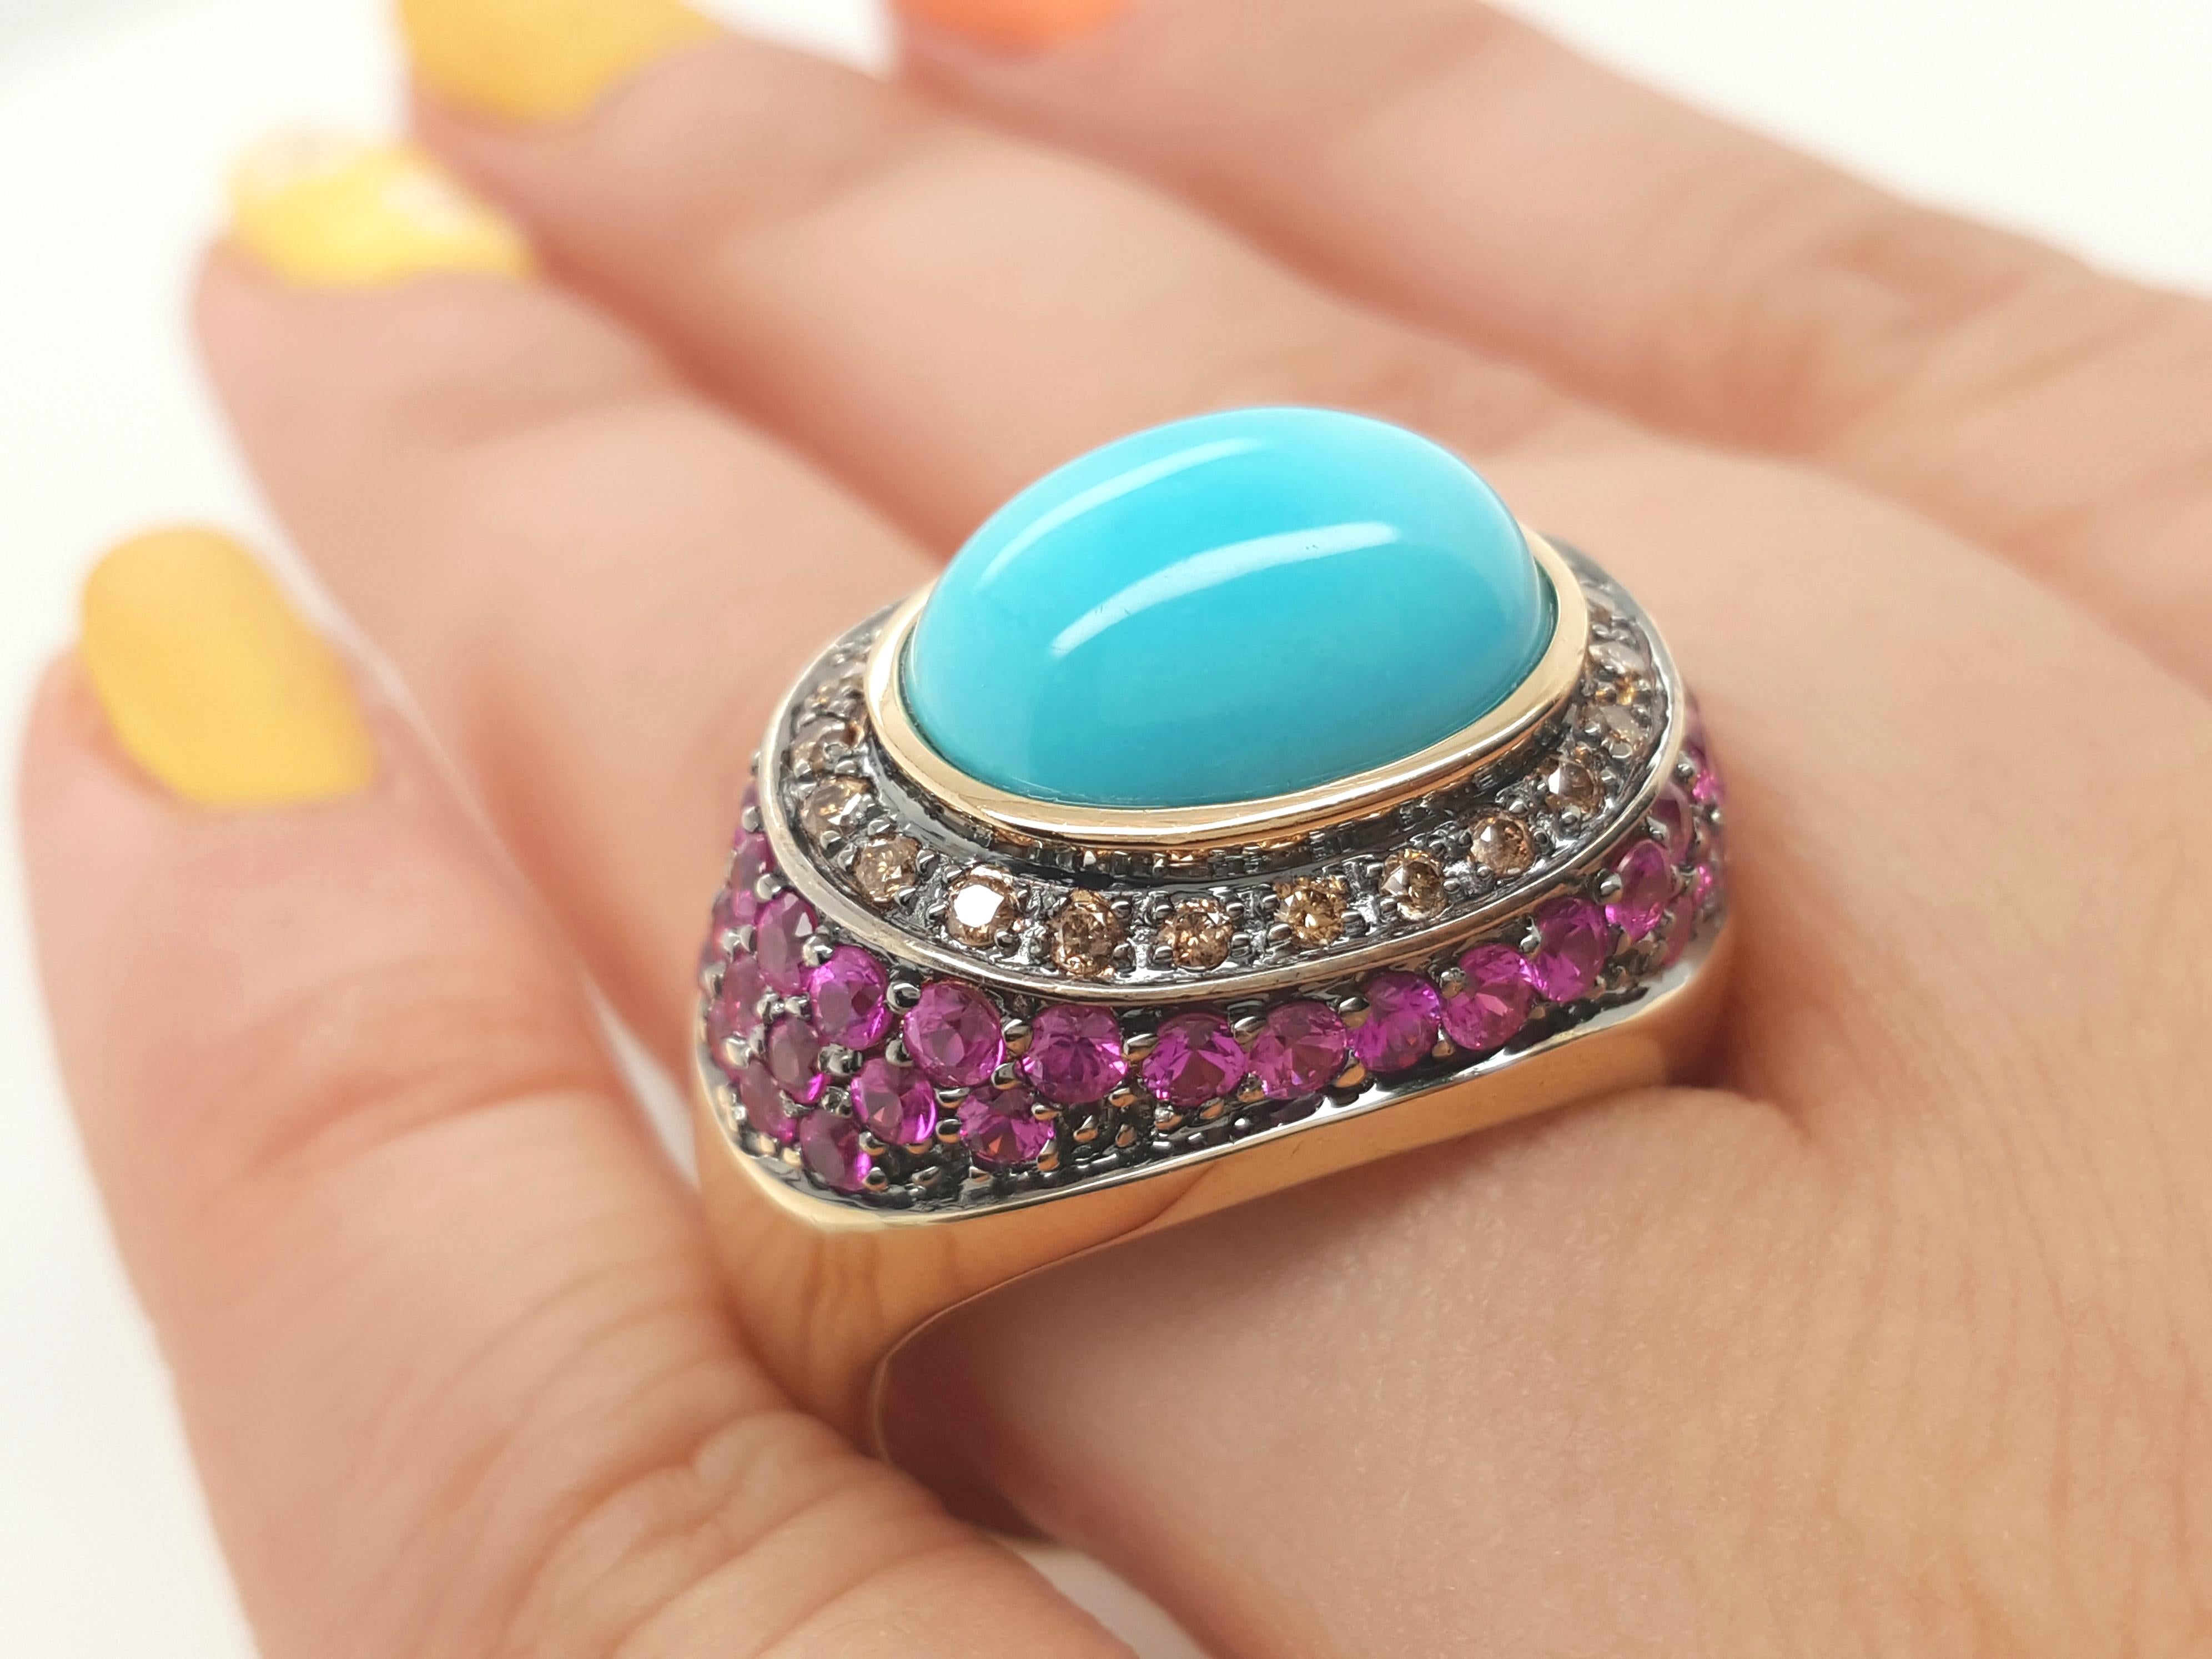 LeVian 14 Karat yellow gold ring includes a beautiful bright Egg Blue Turquoise cabochon center. The turquoise center is bezel set in a yellow gold frame that is complemented with chocolate diamonds and rubies. A gorgeous piece in great condition